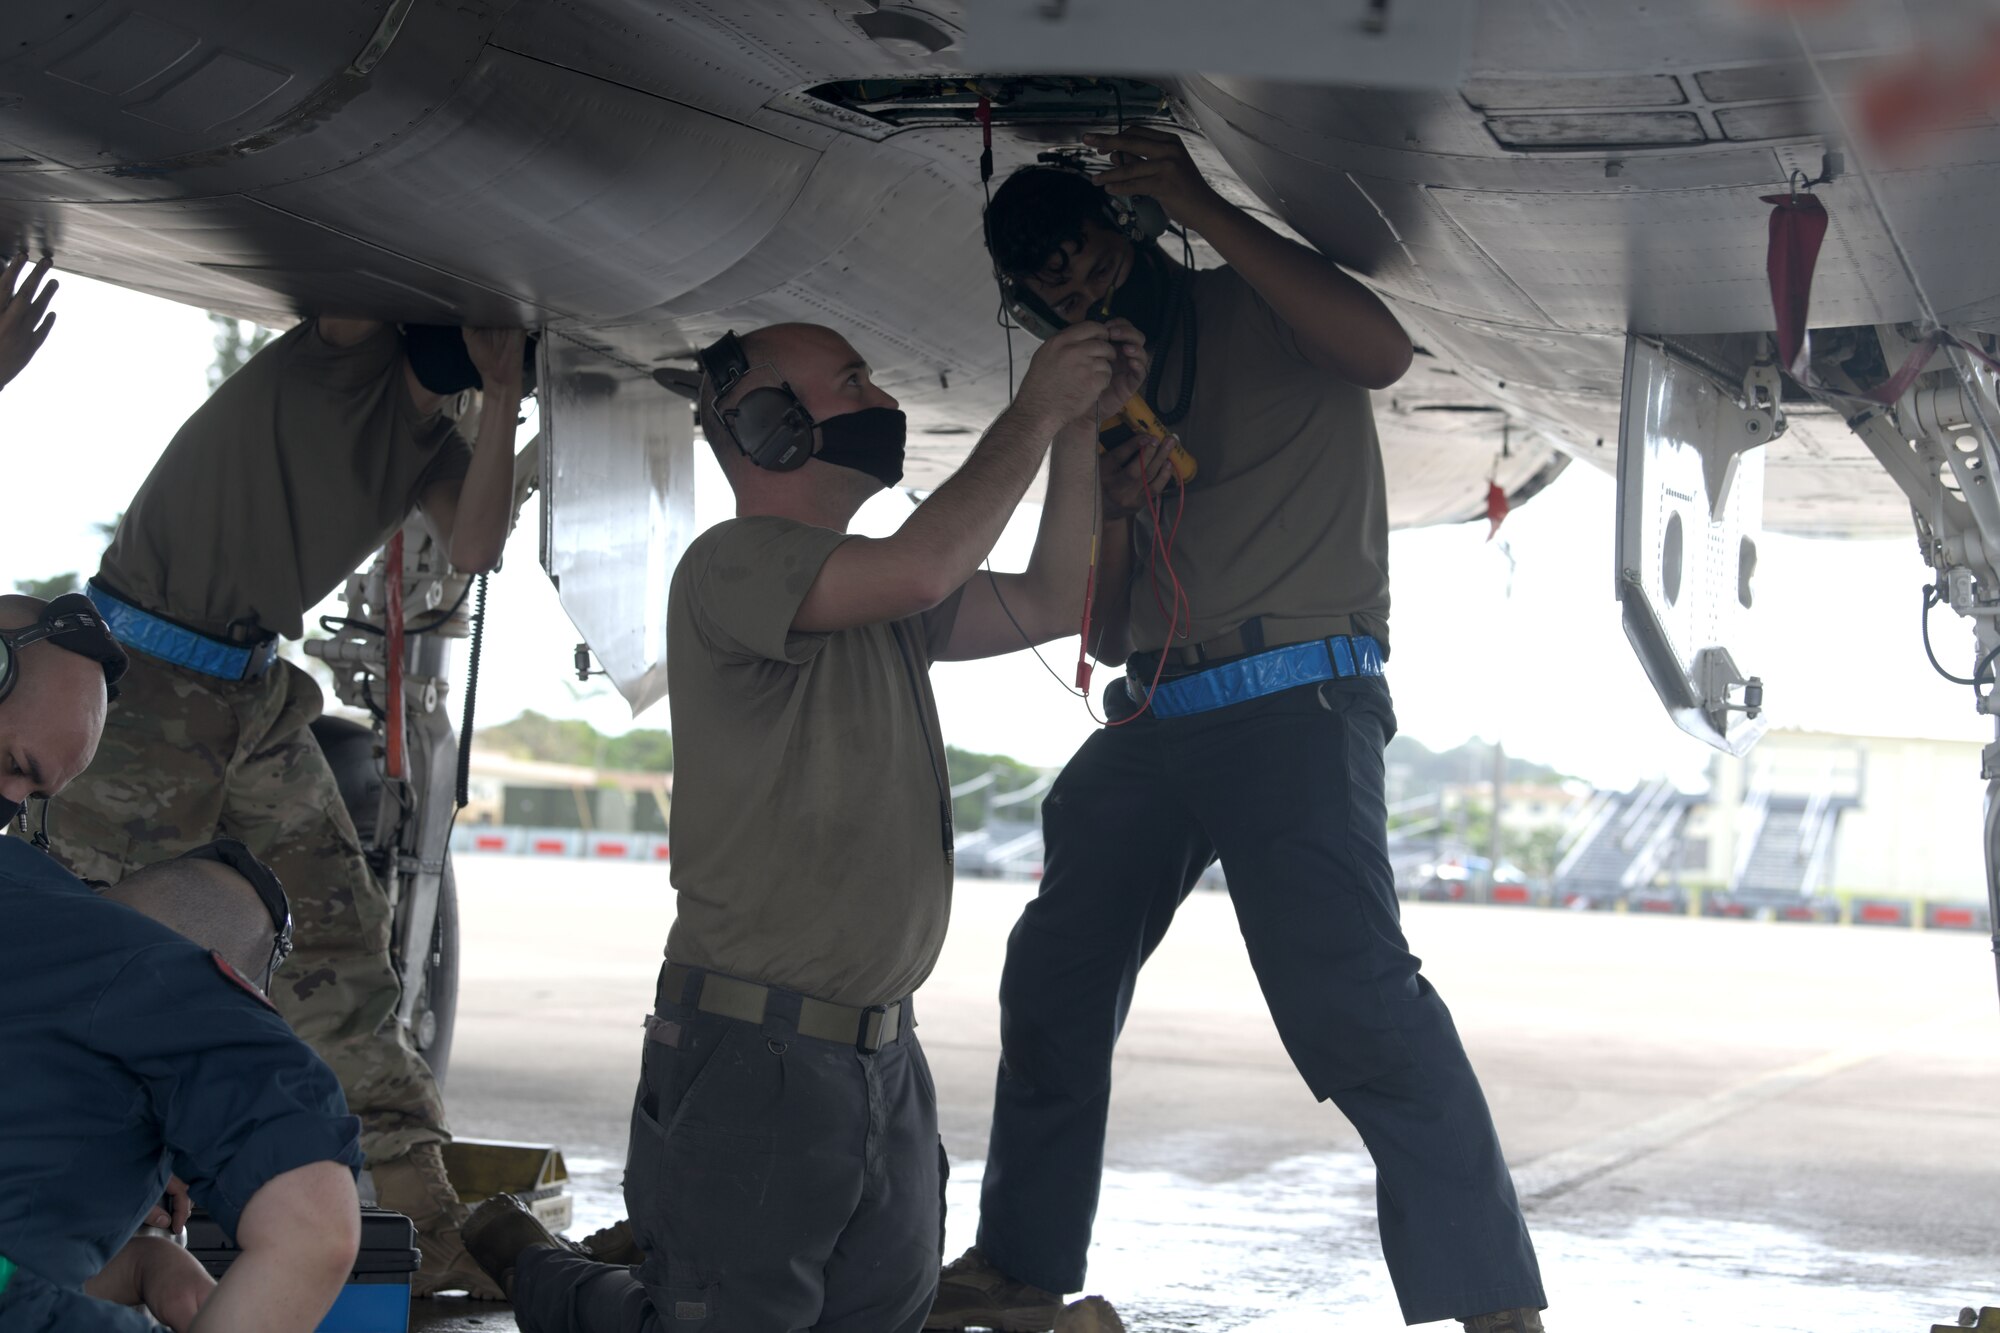 Airmen from the 44th Aircraft Maintenance Unit perform tests on the F-15C Eagle components for any malfunctions during a “Super Surge,” at Kadena Air Base, Japan, Nov. 18, 2020. The 44th and 67th AMUs and Fighter Squadrons flew 437 sorties during the surge. (U.S. Air Force photo by Airman 1st Class Rebeckah Medeiros)